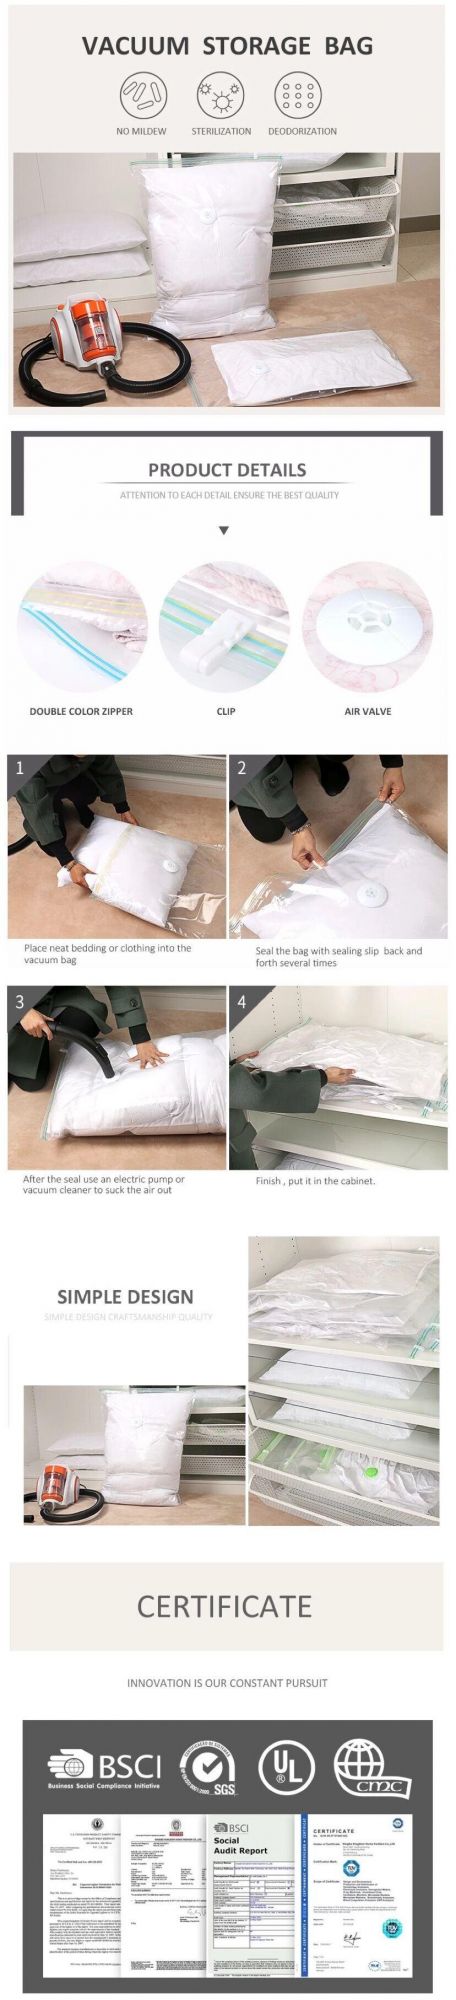 Compressed 75% Space Vacuum Bag for Bedding and Clothes